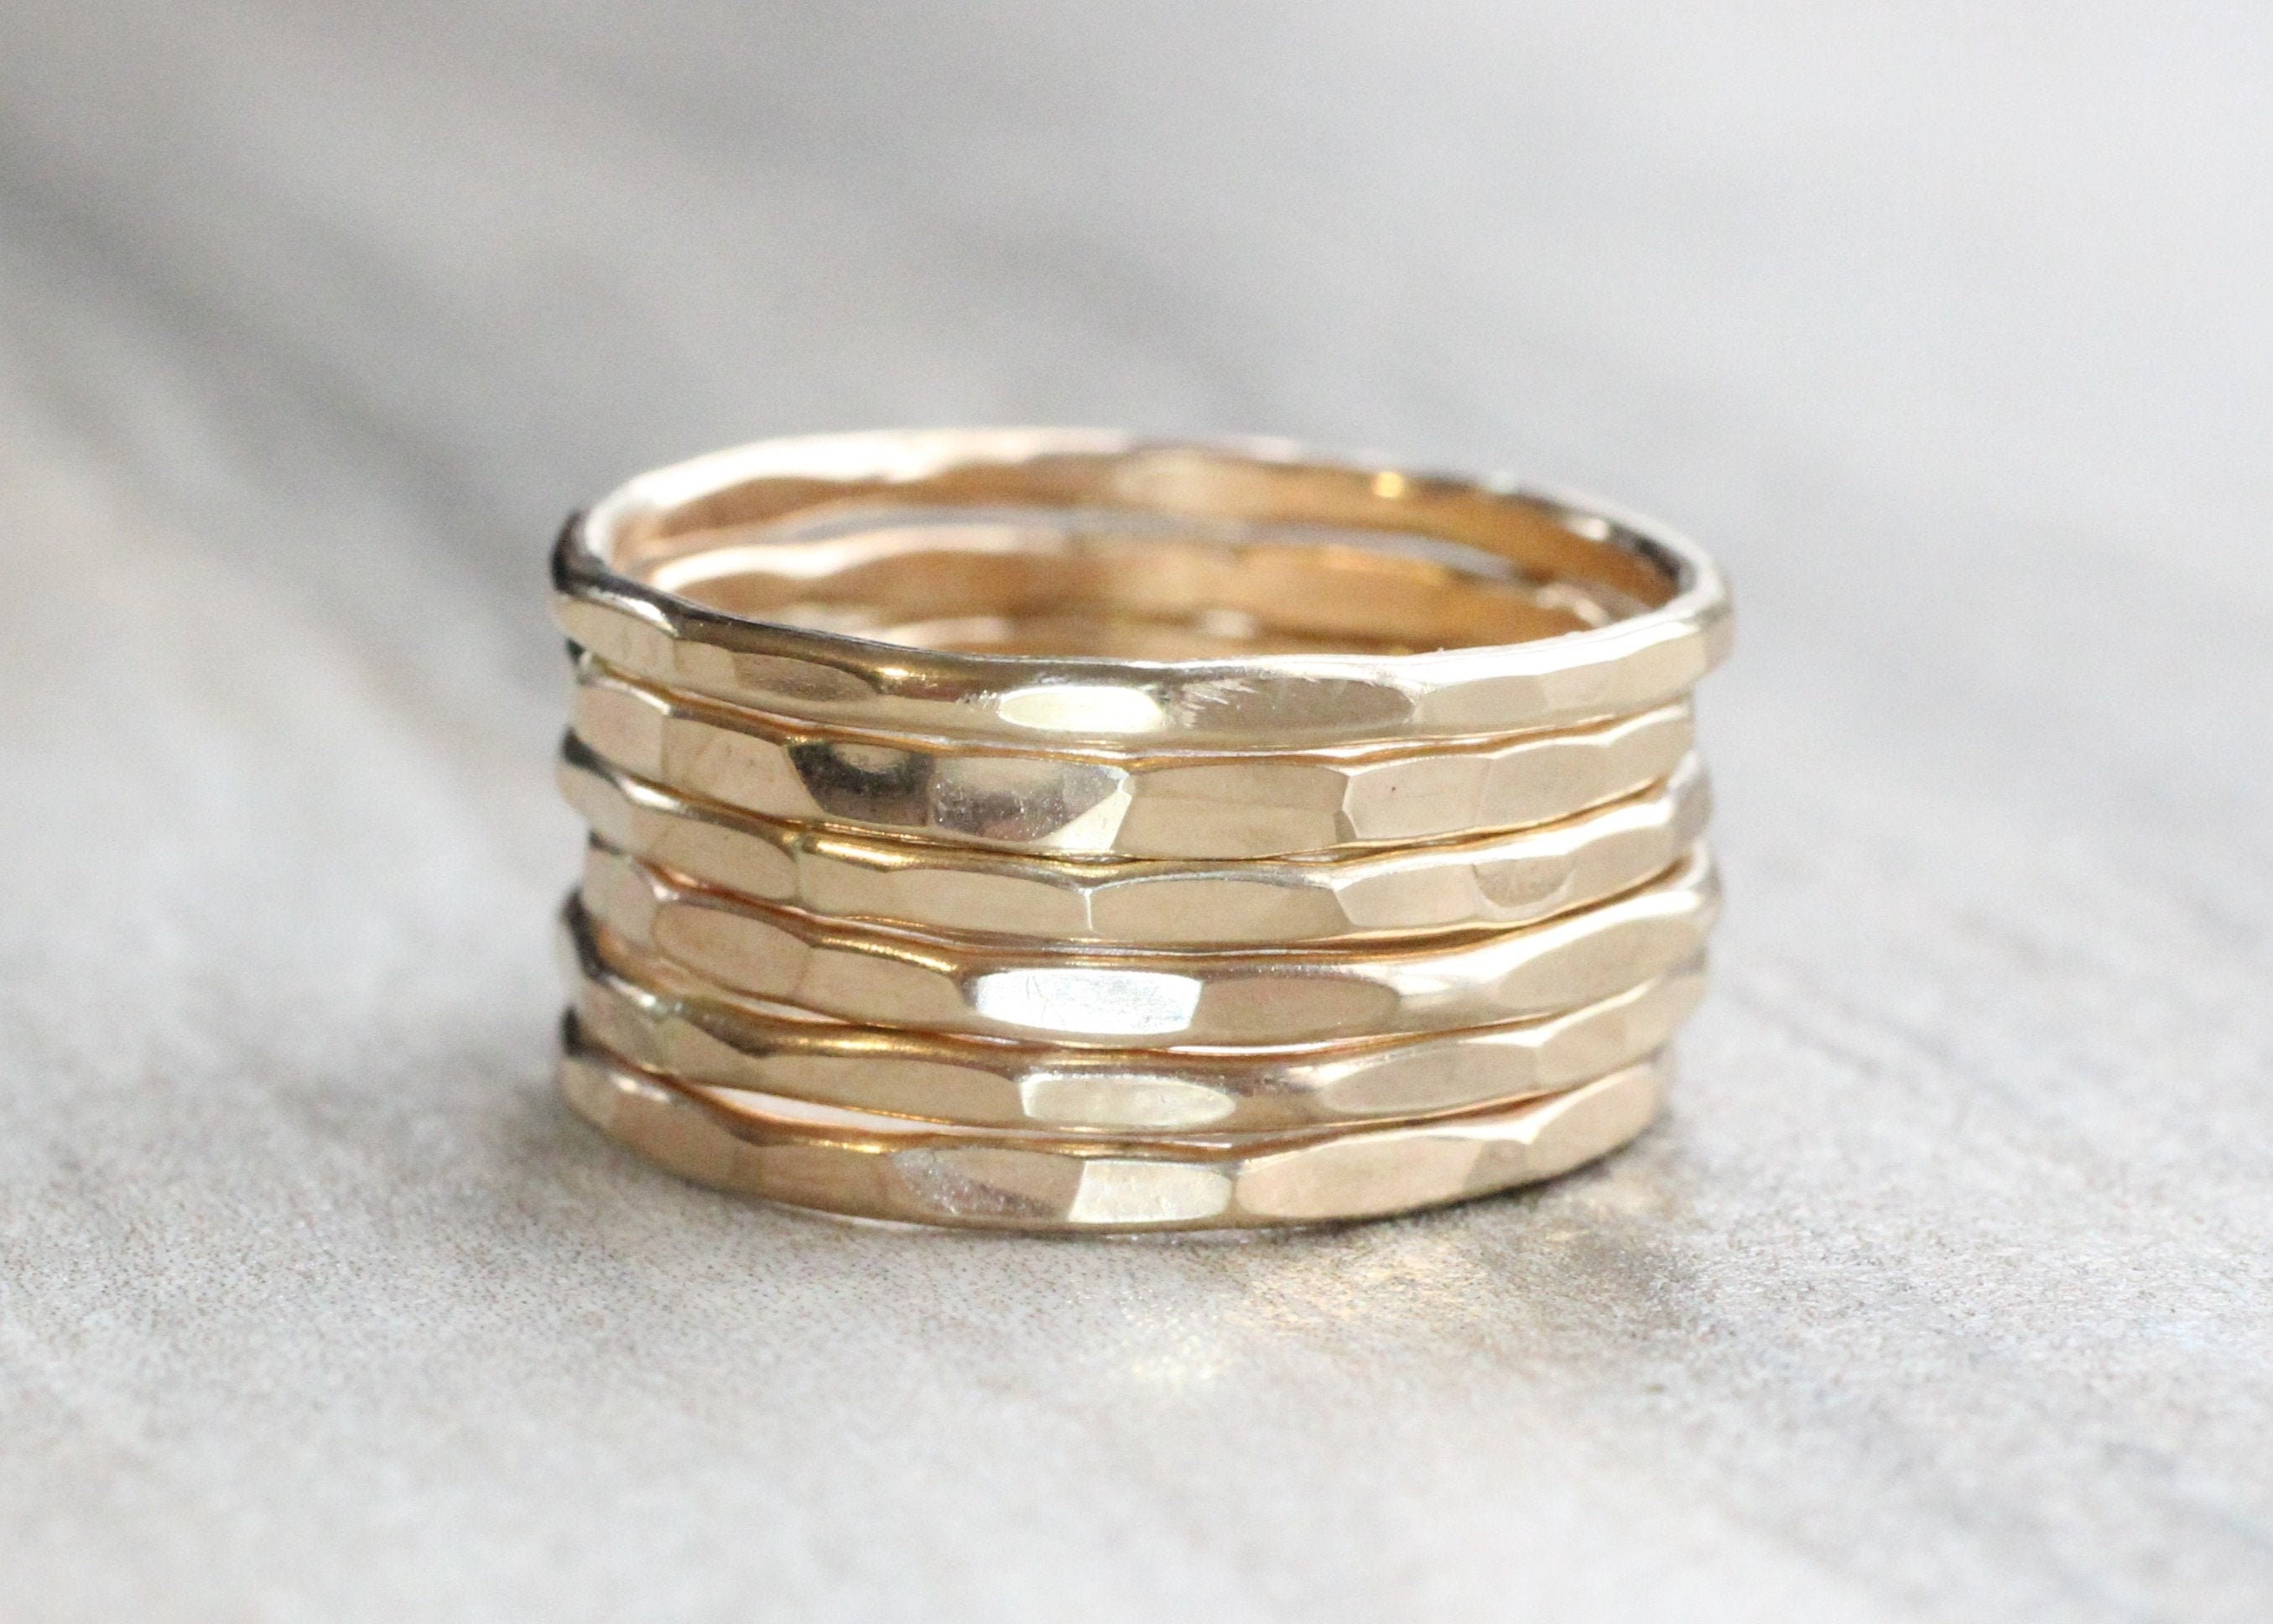 Twist 14K Gold Stacking Ring Set // Set of 5 Yellow Gold Stackable Rings // 14K Gold Filled Stackable Rings // Smooth and Hammered Bands